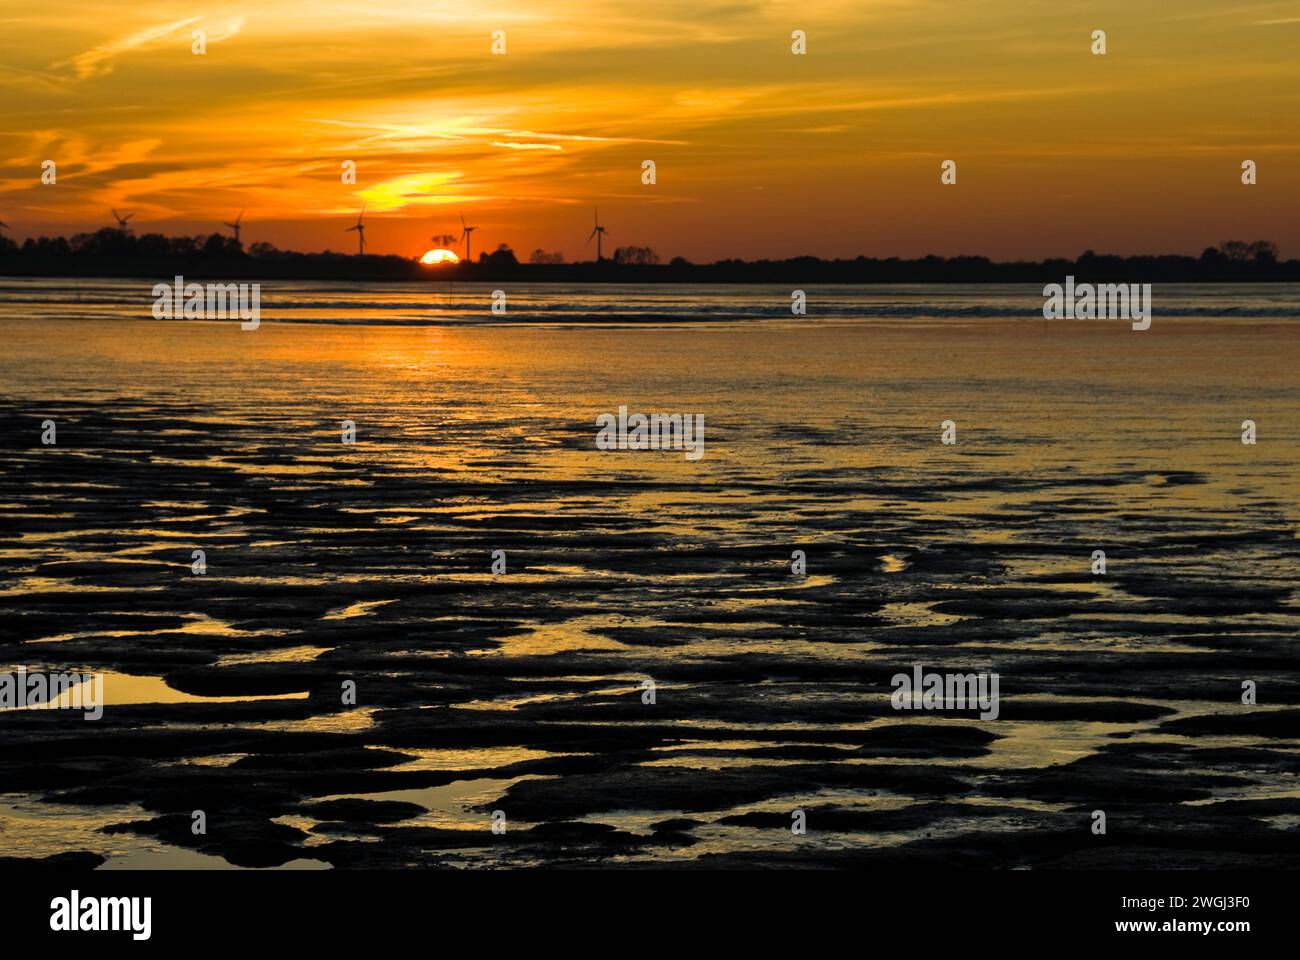 Vibrant sunrise over calm water and rocky shore, showcasing a distant sailboat Stock Photo